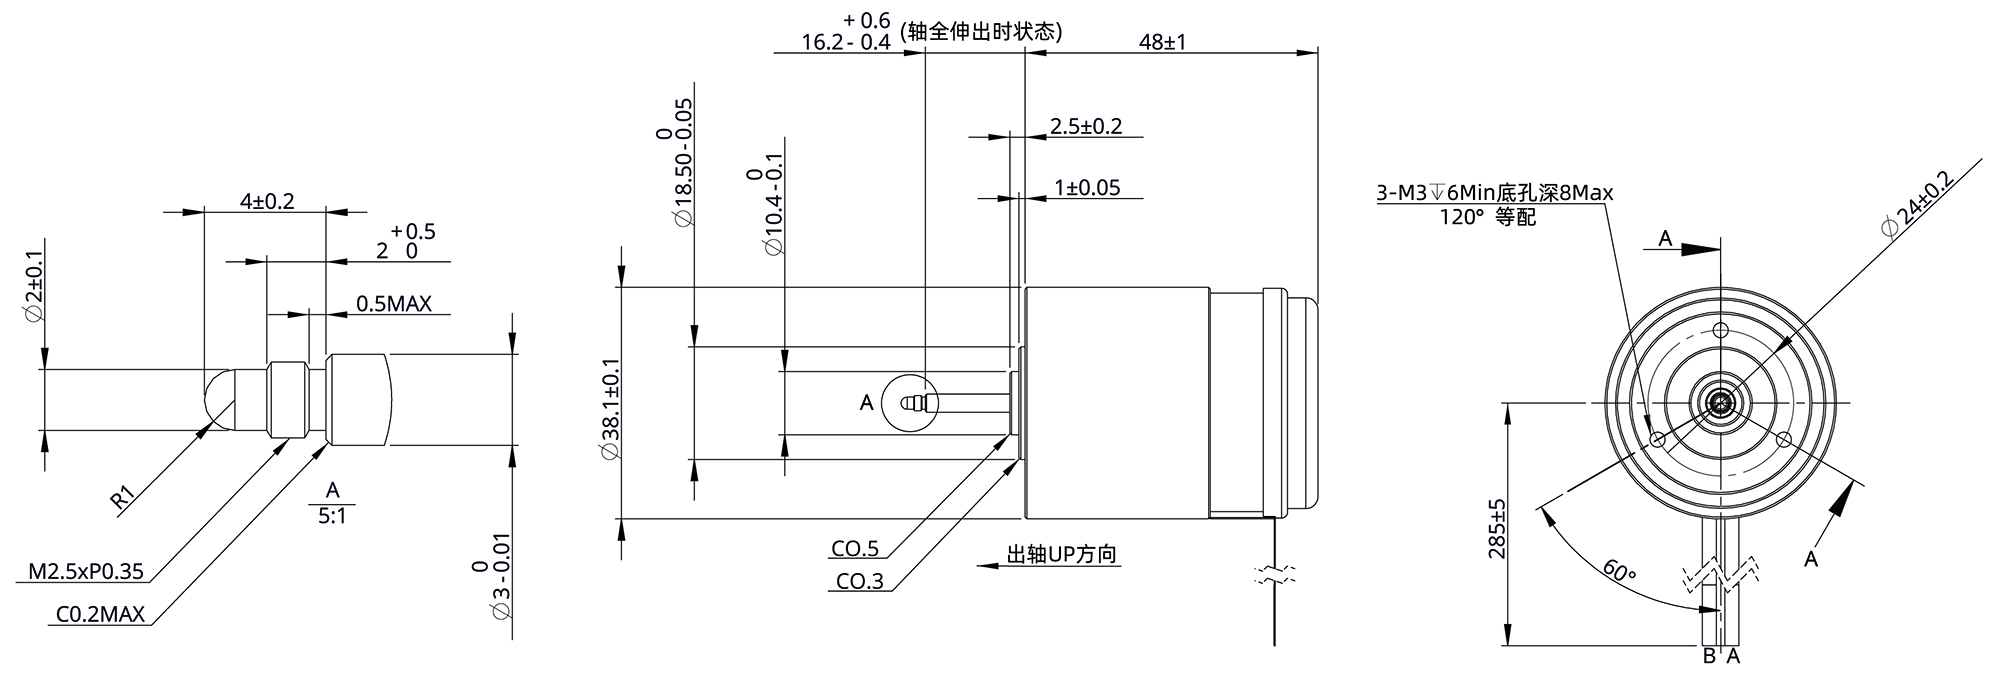 Voice Coil Motor Frame Size